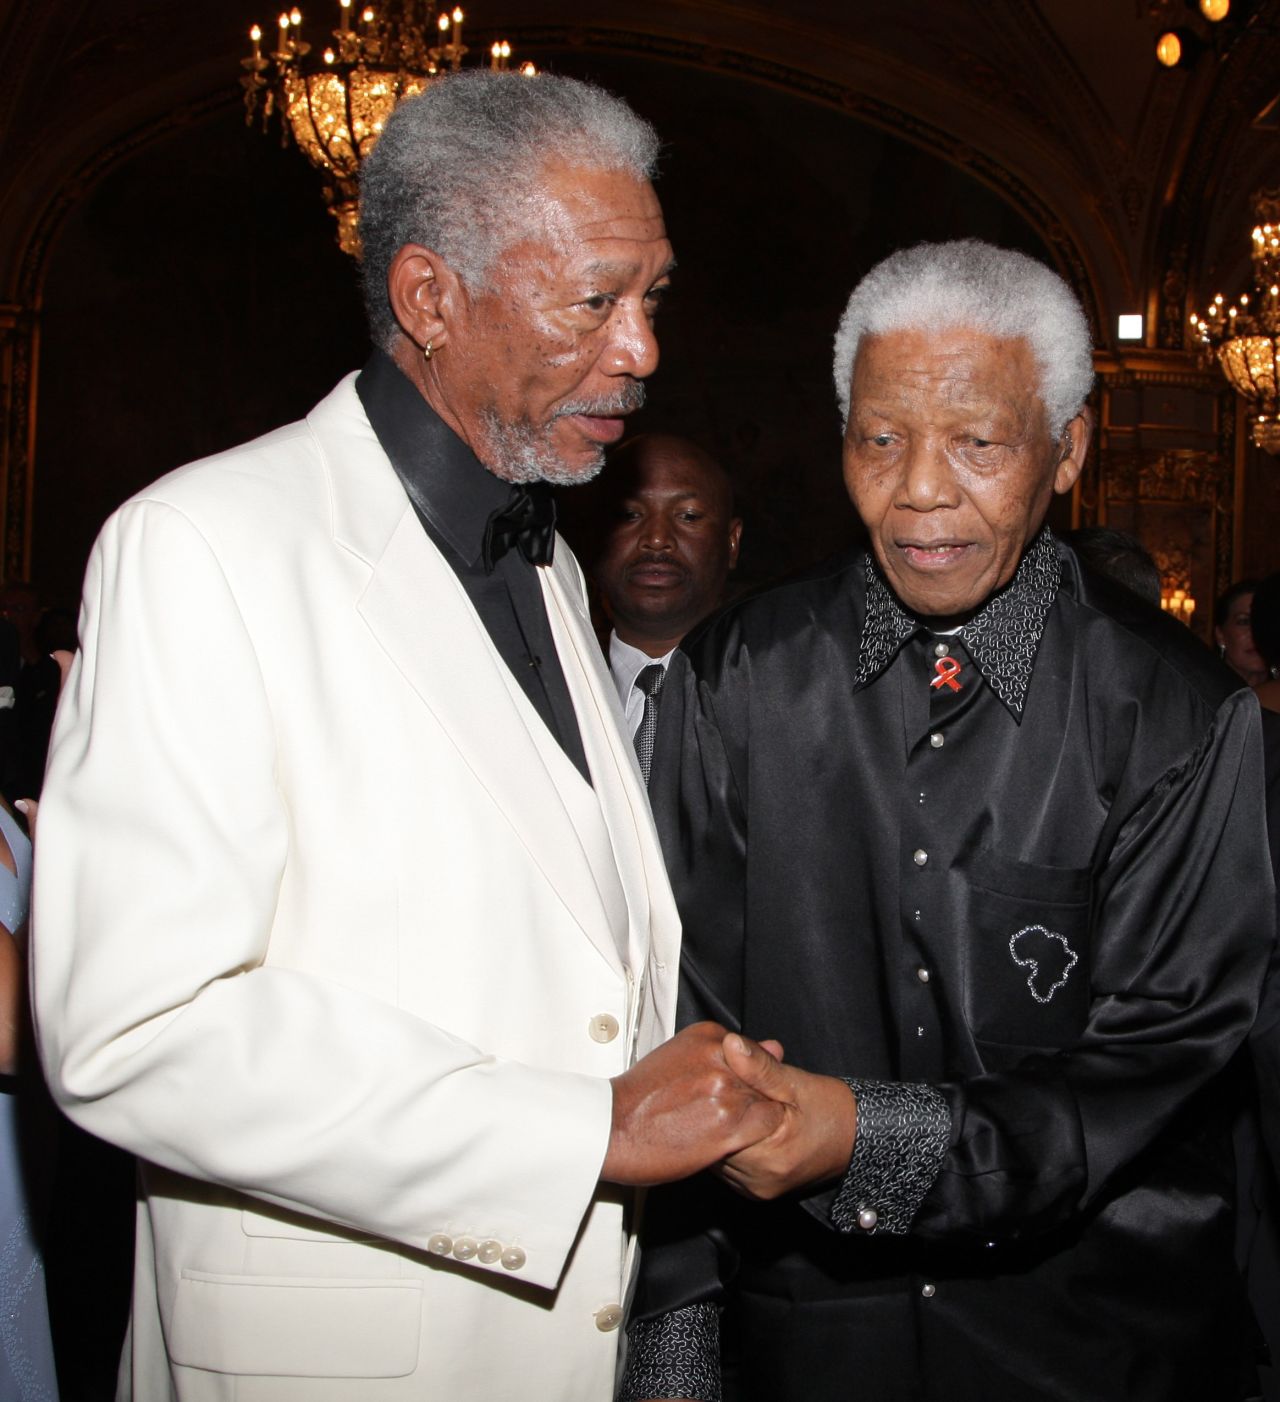 Morgan Freeman, who played Nelson Mandela in the 2009 film "Invictus," is pictured with the South African president at a gala dinner in Monaco two years earlier.